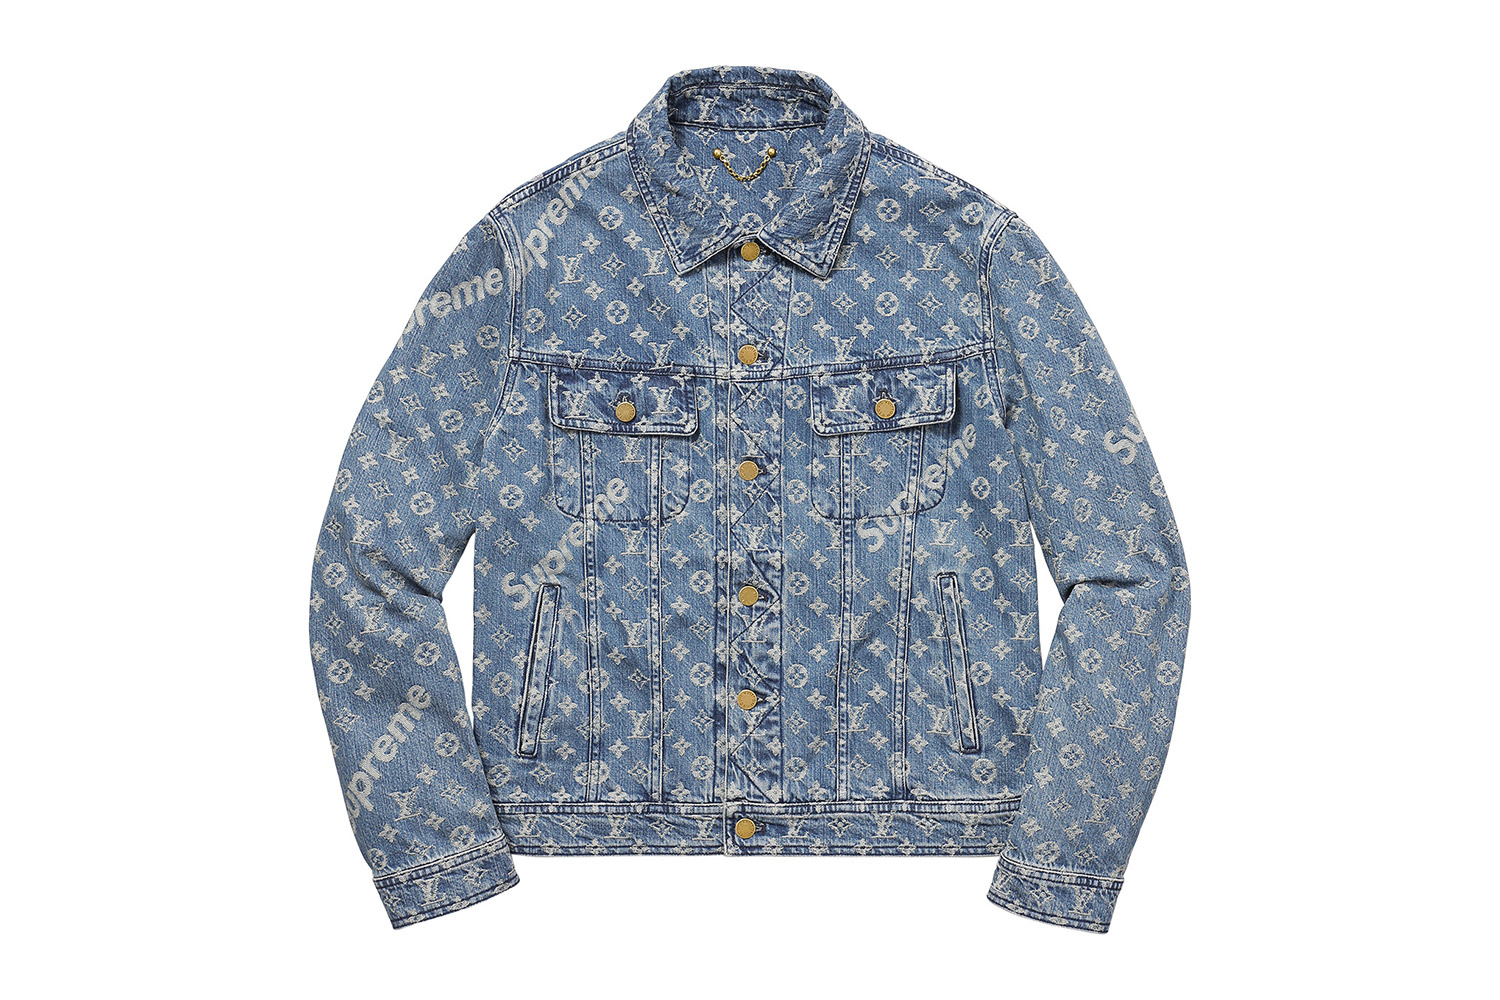 Every piece from the highly anticipated Supreme x Louis Vuitton ...